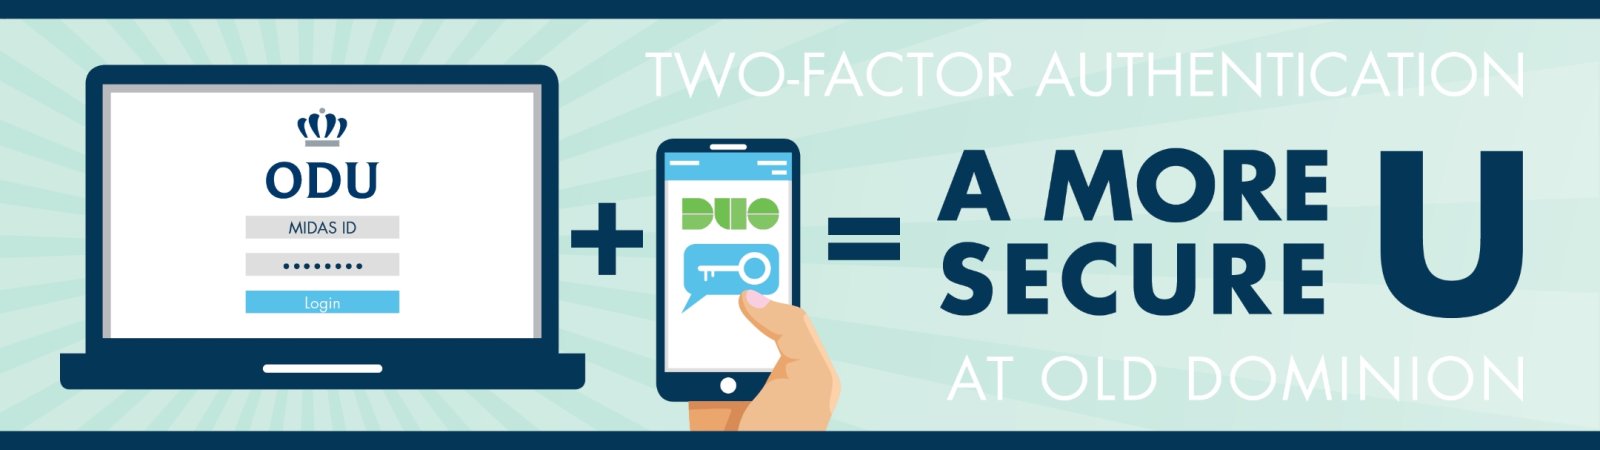 Two-Factor Authentication Banner